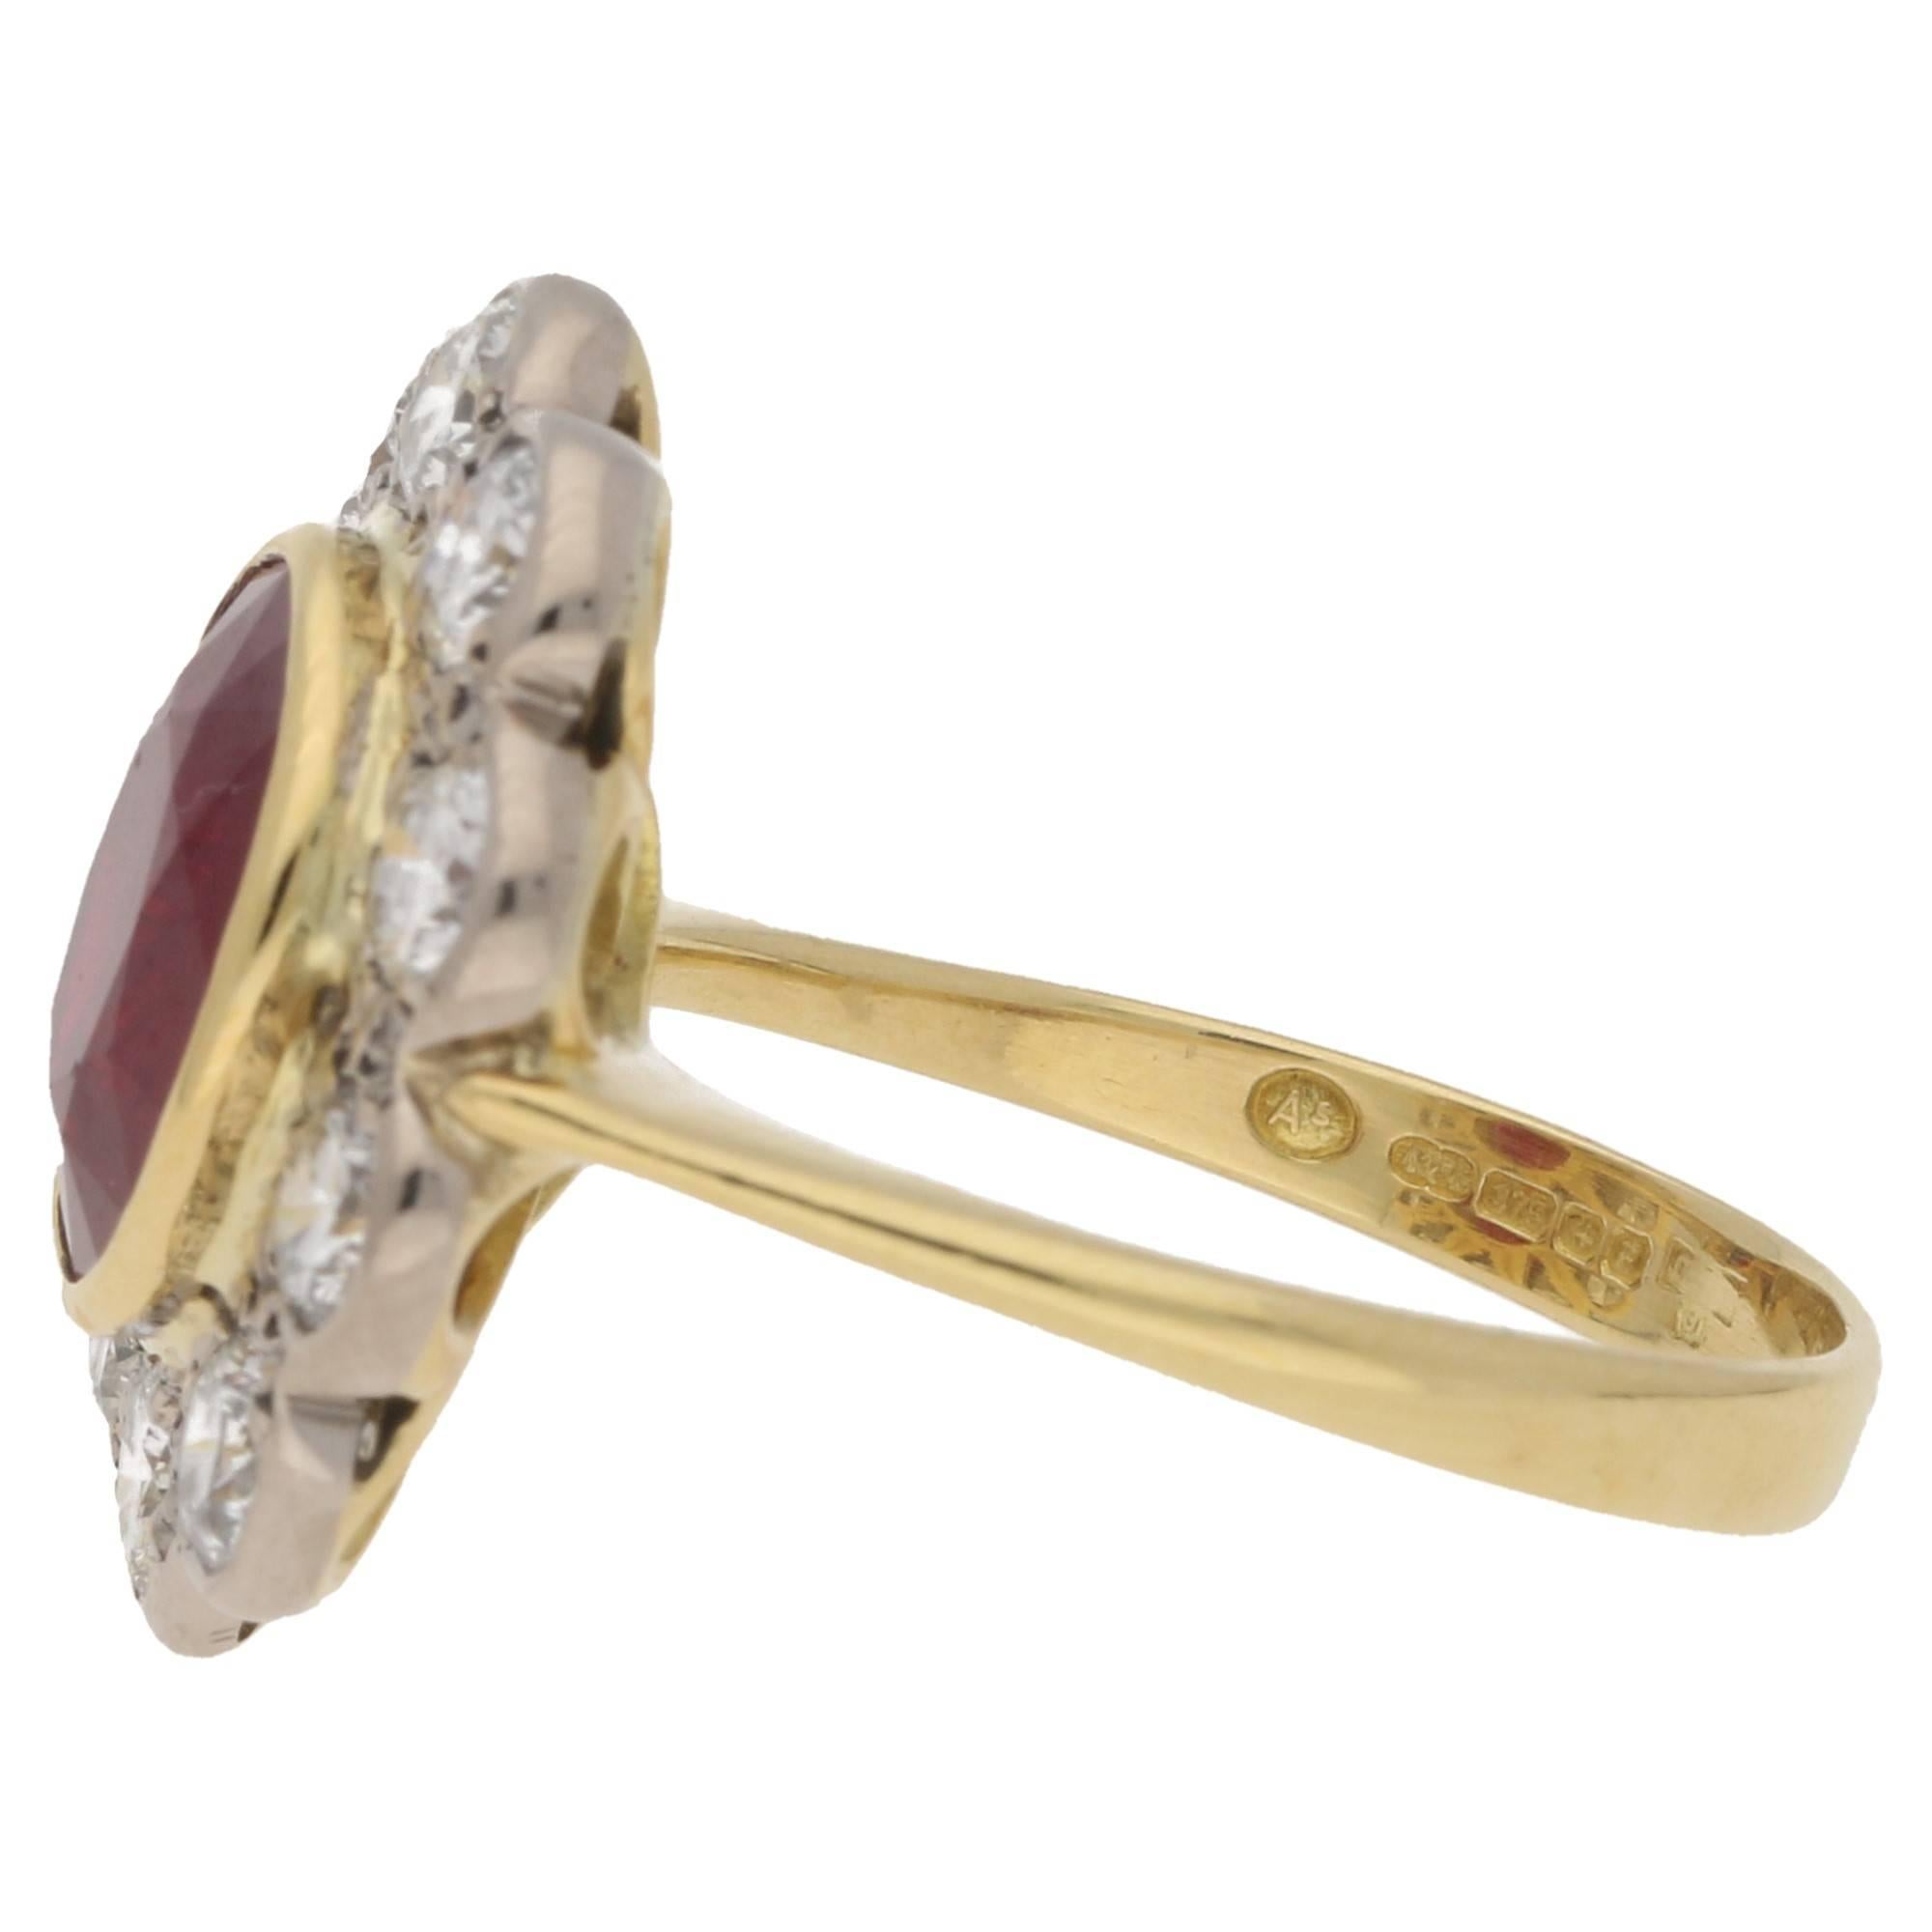 A ruby and diamond floral cluster ring. The ring is formed of one oval faceted ruby centrally set in a yellow gold rub-over setting. The ring is further embellished with ten round brilliant cut diamonds in a white gold rub-over setting forming the